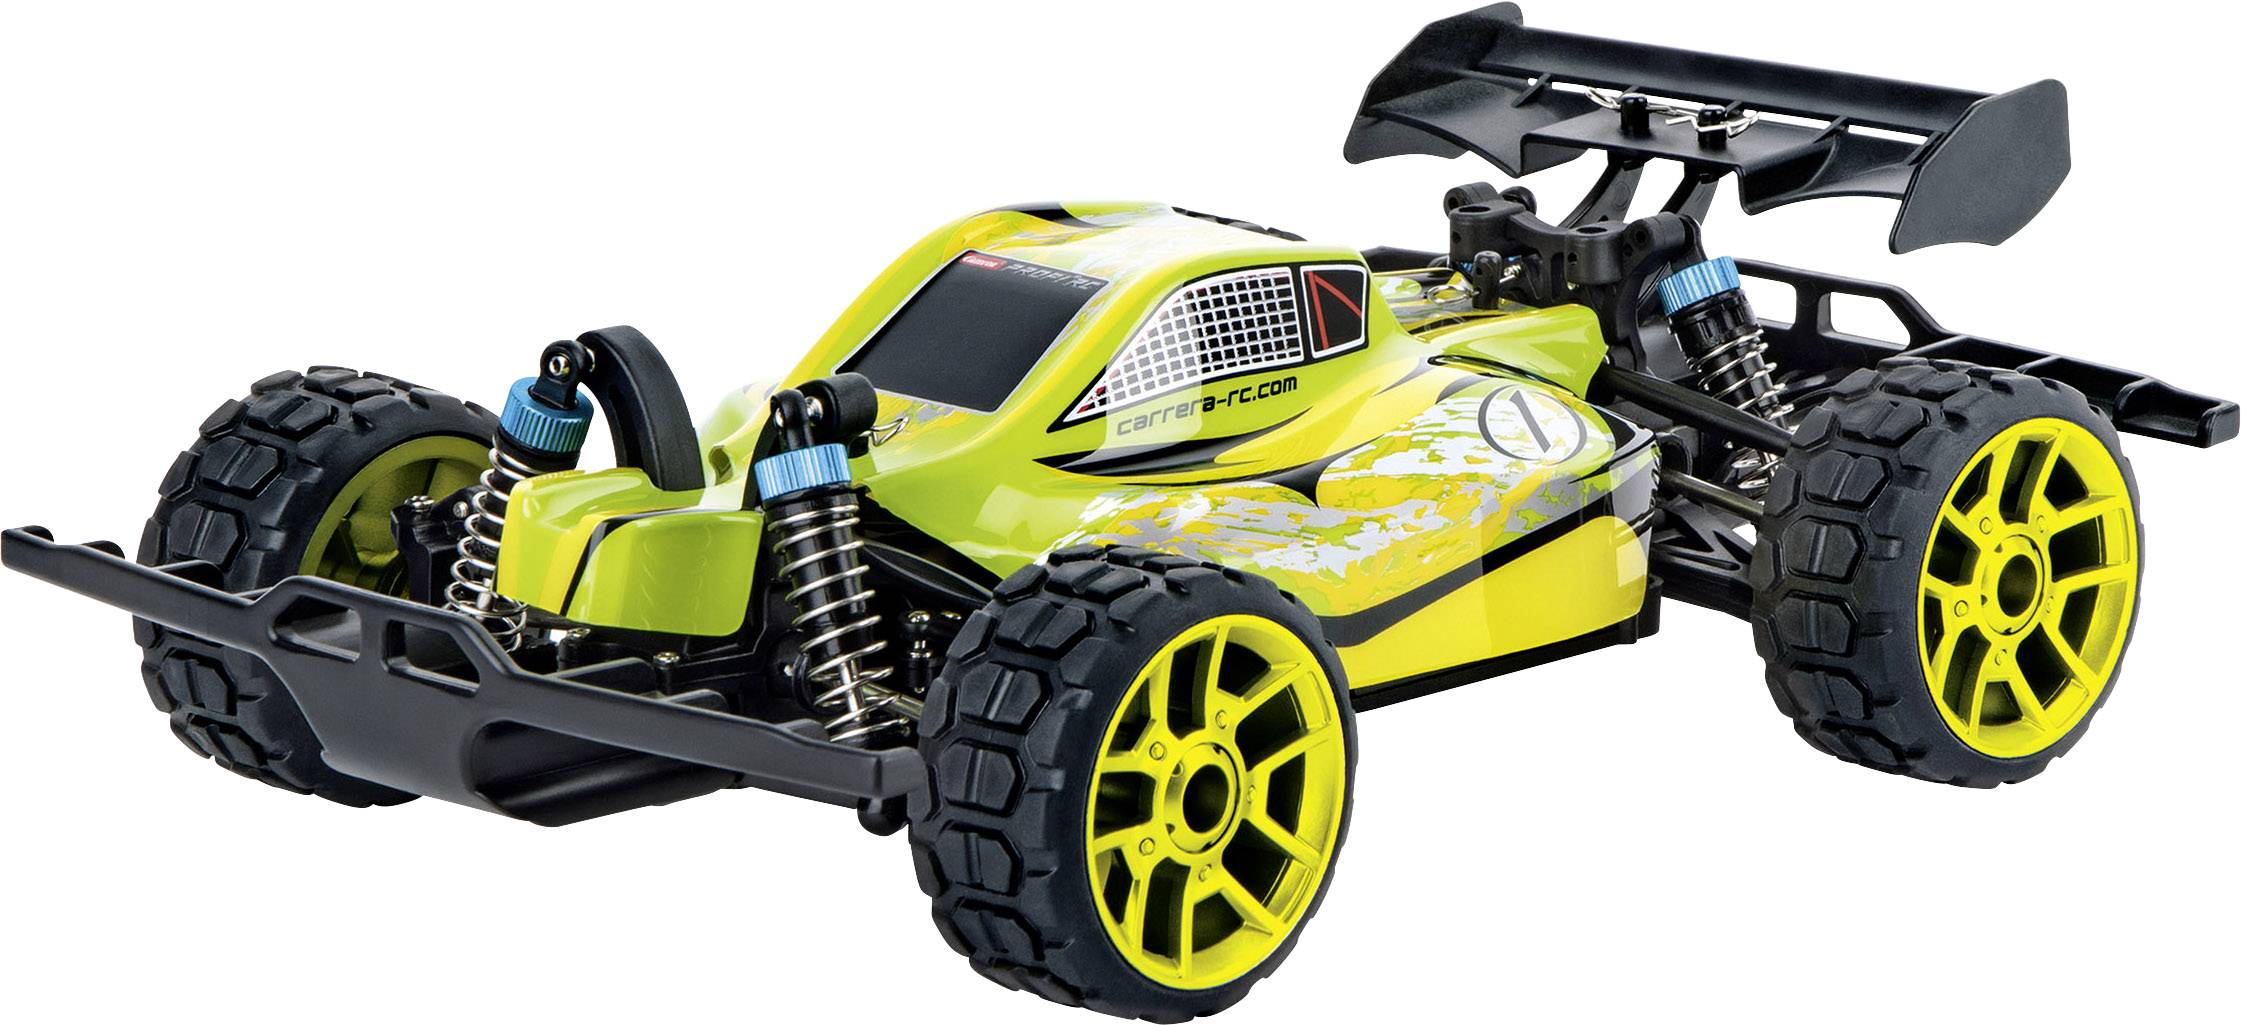 Carrera RC 370183012 Lime Star 1:18 car for beginners Electric Monster truck 4WD Incl. and charger | Conrad.com